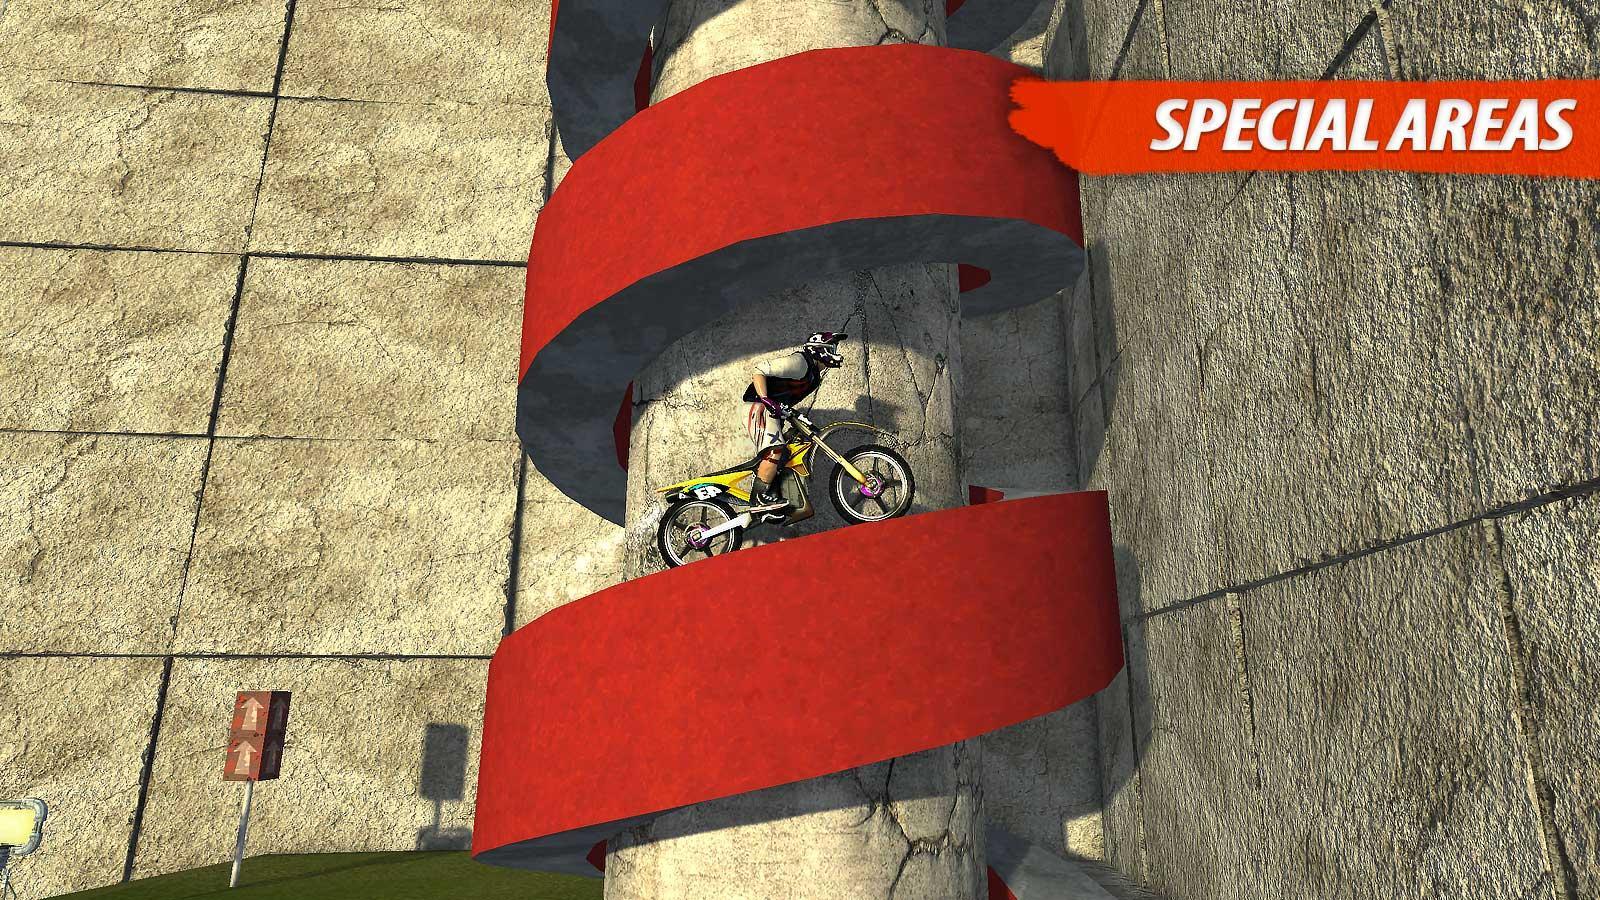 Bike Racing 2 APK for Android Download